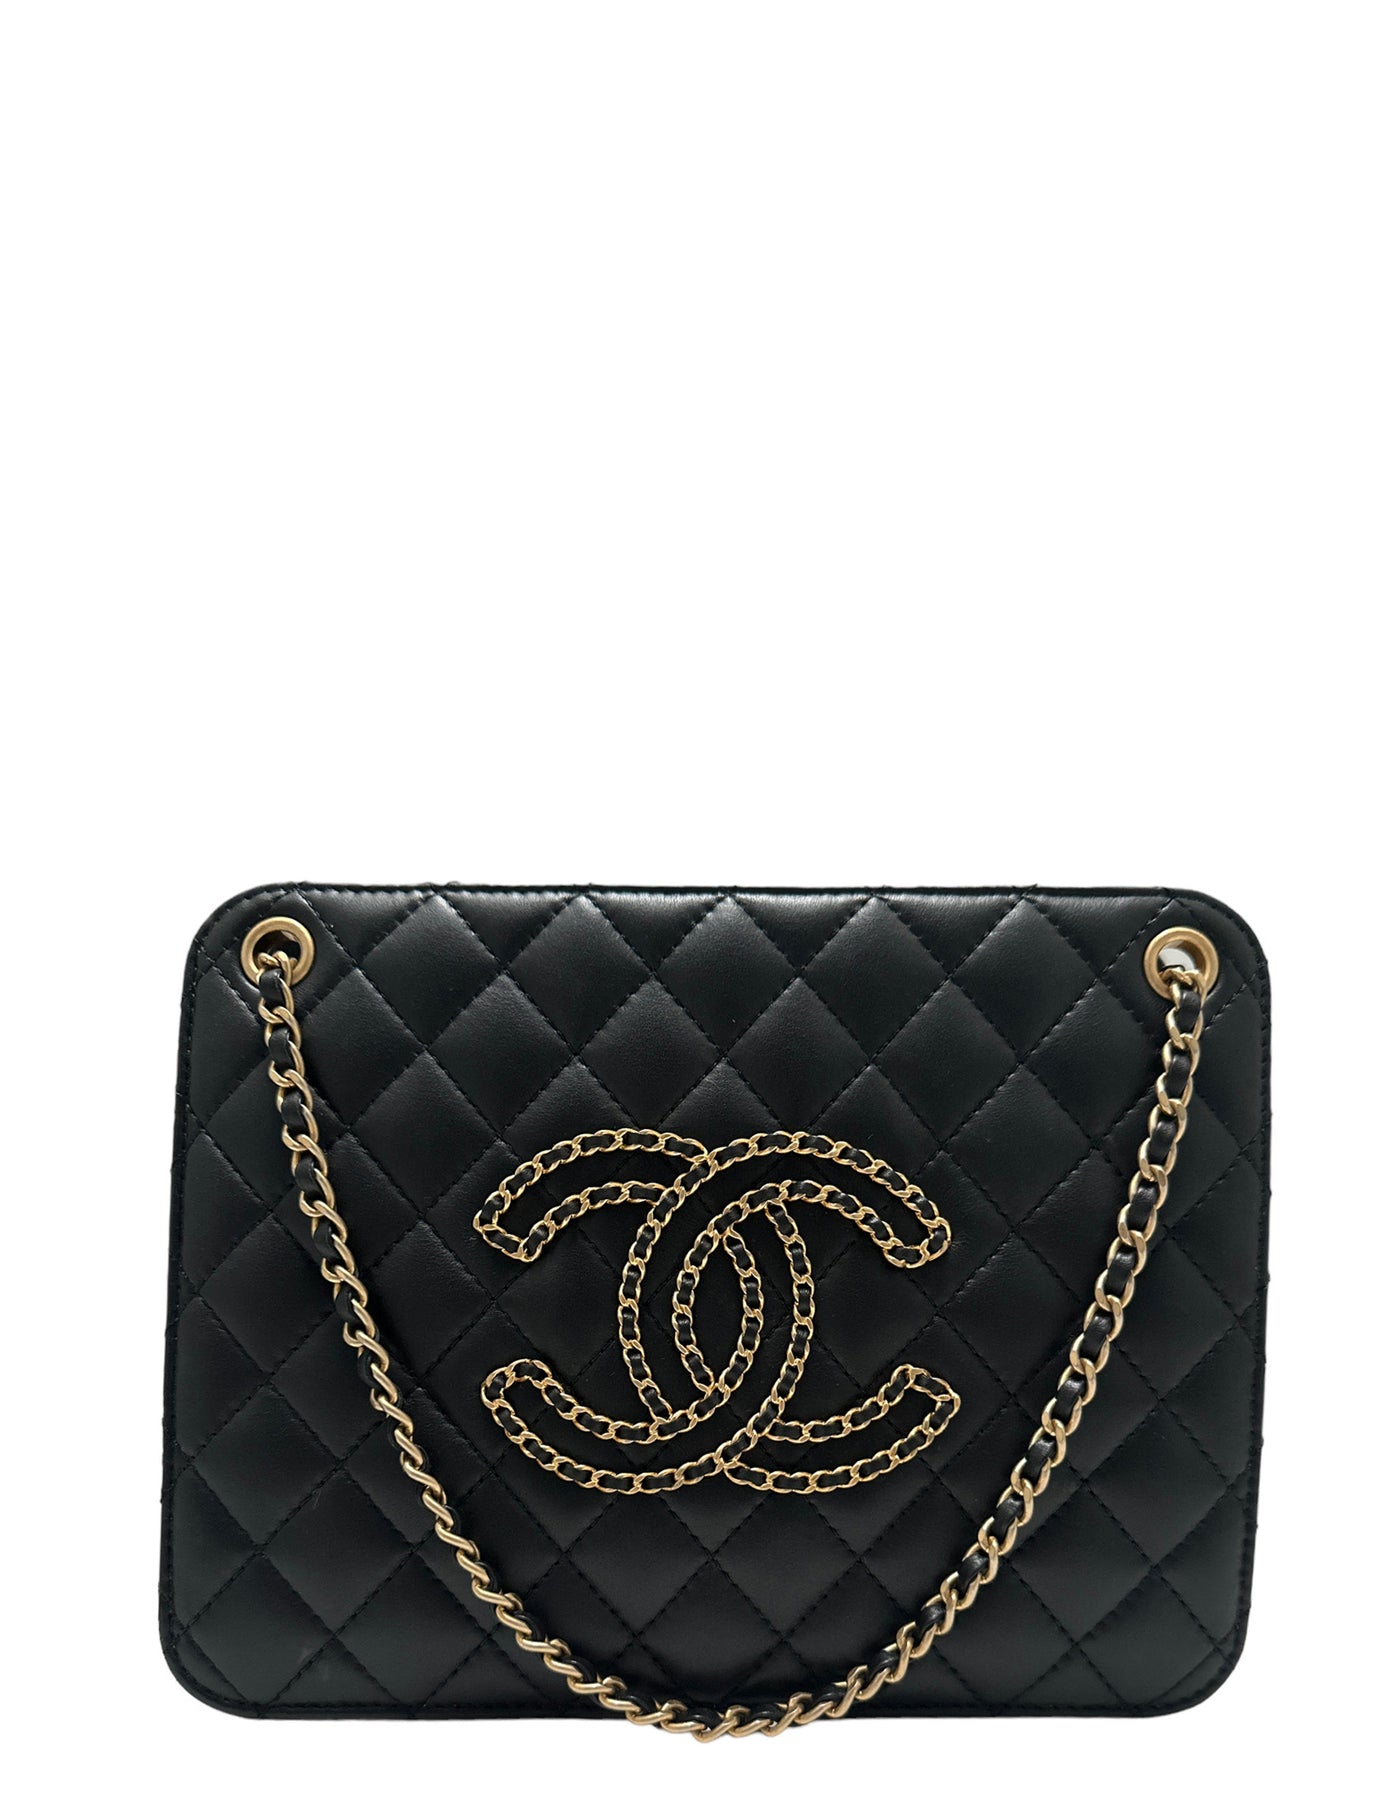 Chanel Black Calfskin Quilted Small CC Chain Accordion Tote Bag – ASC Resale